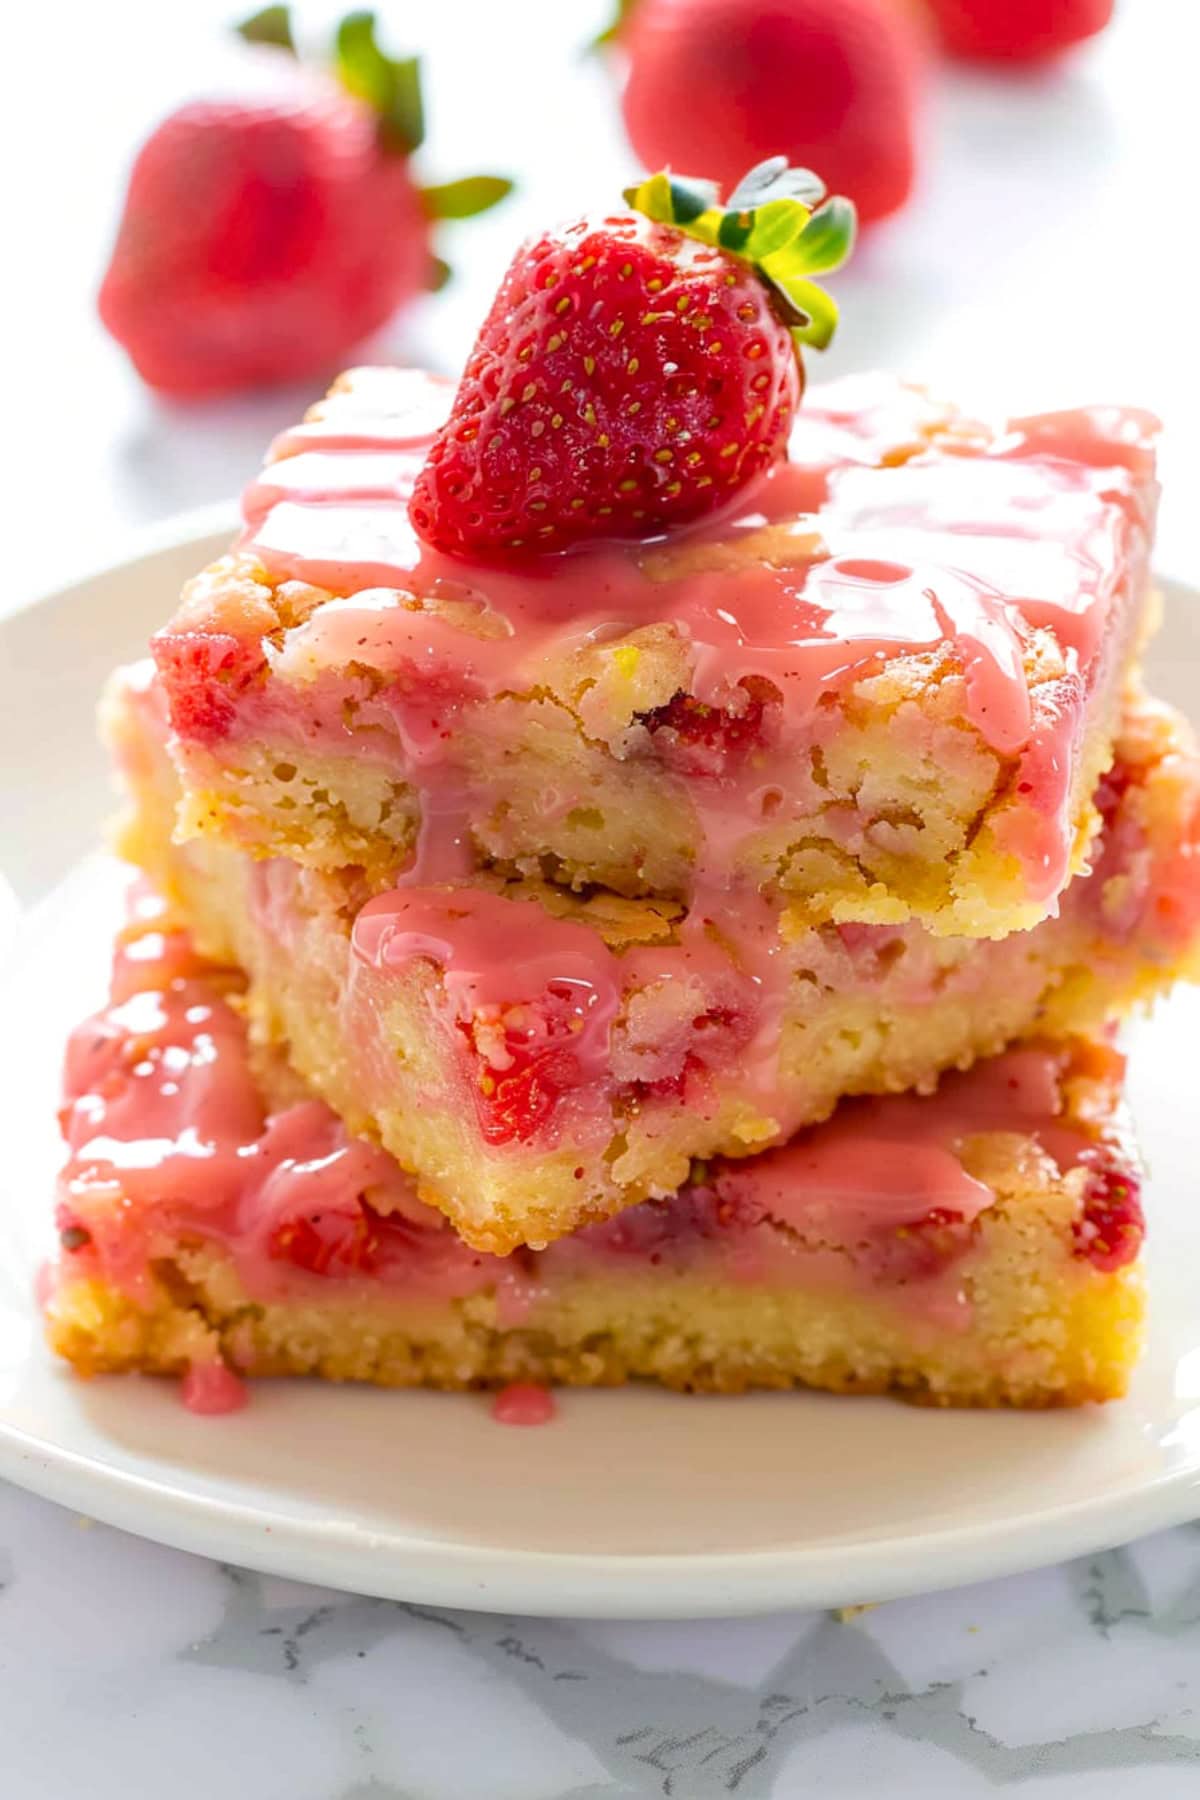 Strawberry lemon blondies on a white plate garnished with fresh strawberries and sweet glaze.